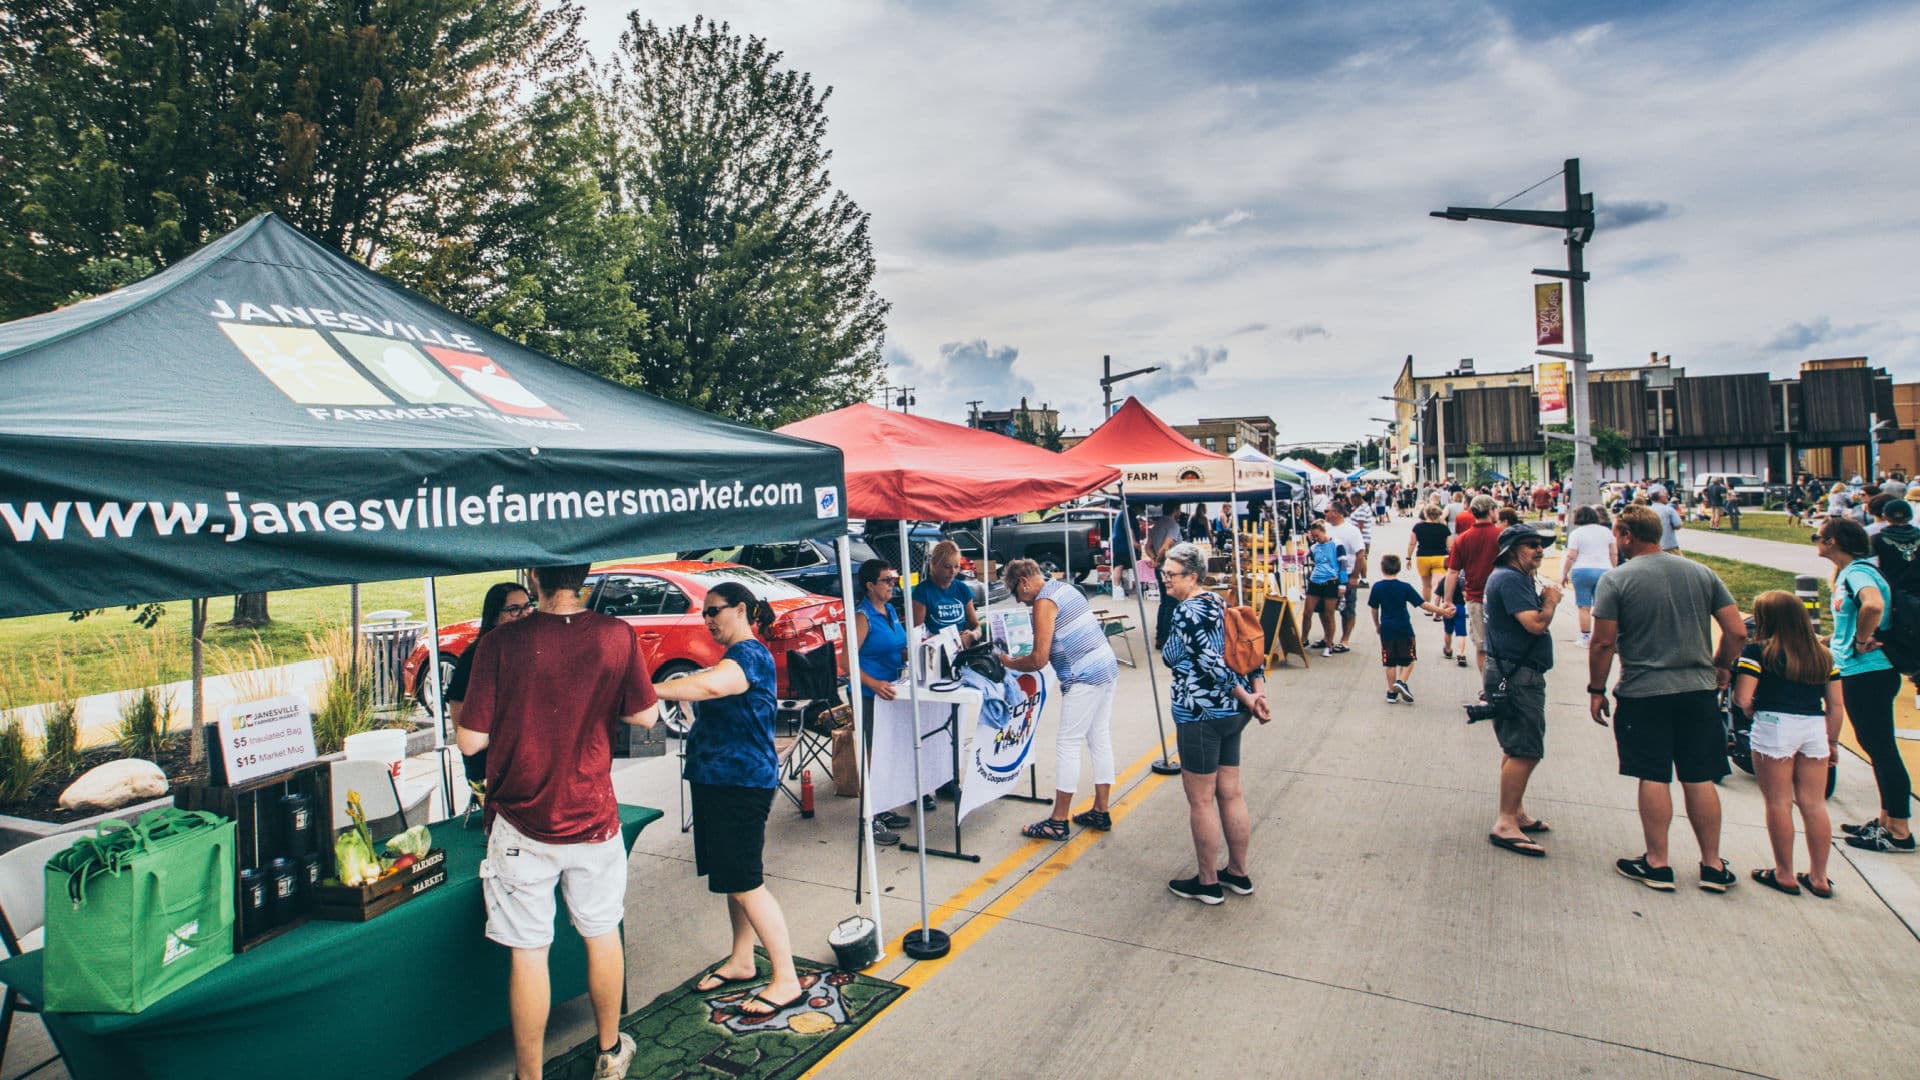 Shoppers at the Janesville Farmers Market - Photo by Full Spectrum Photography